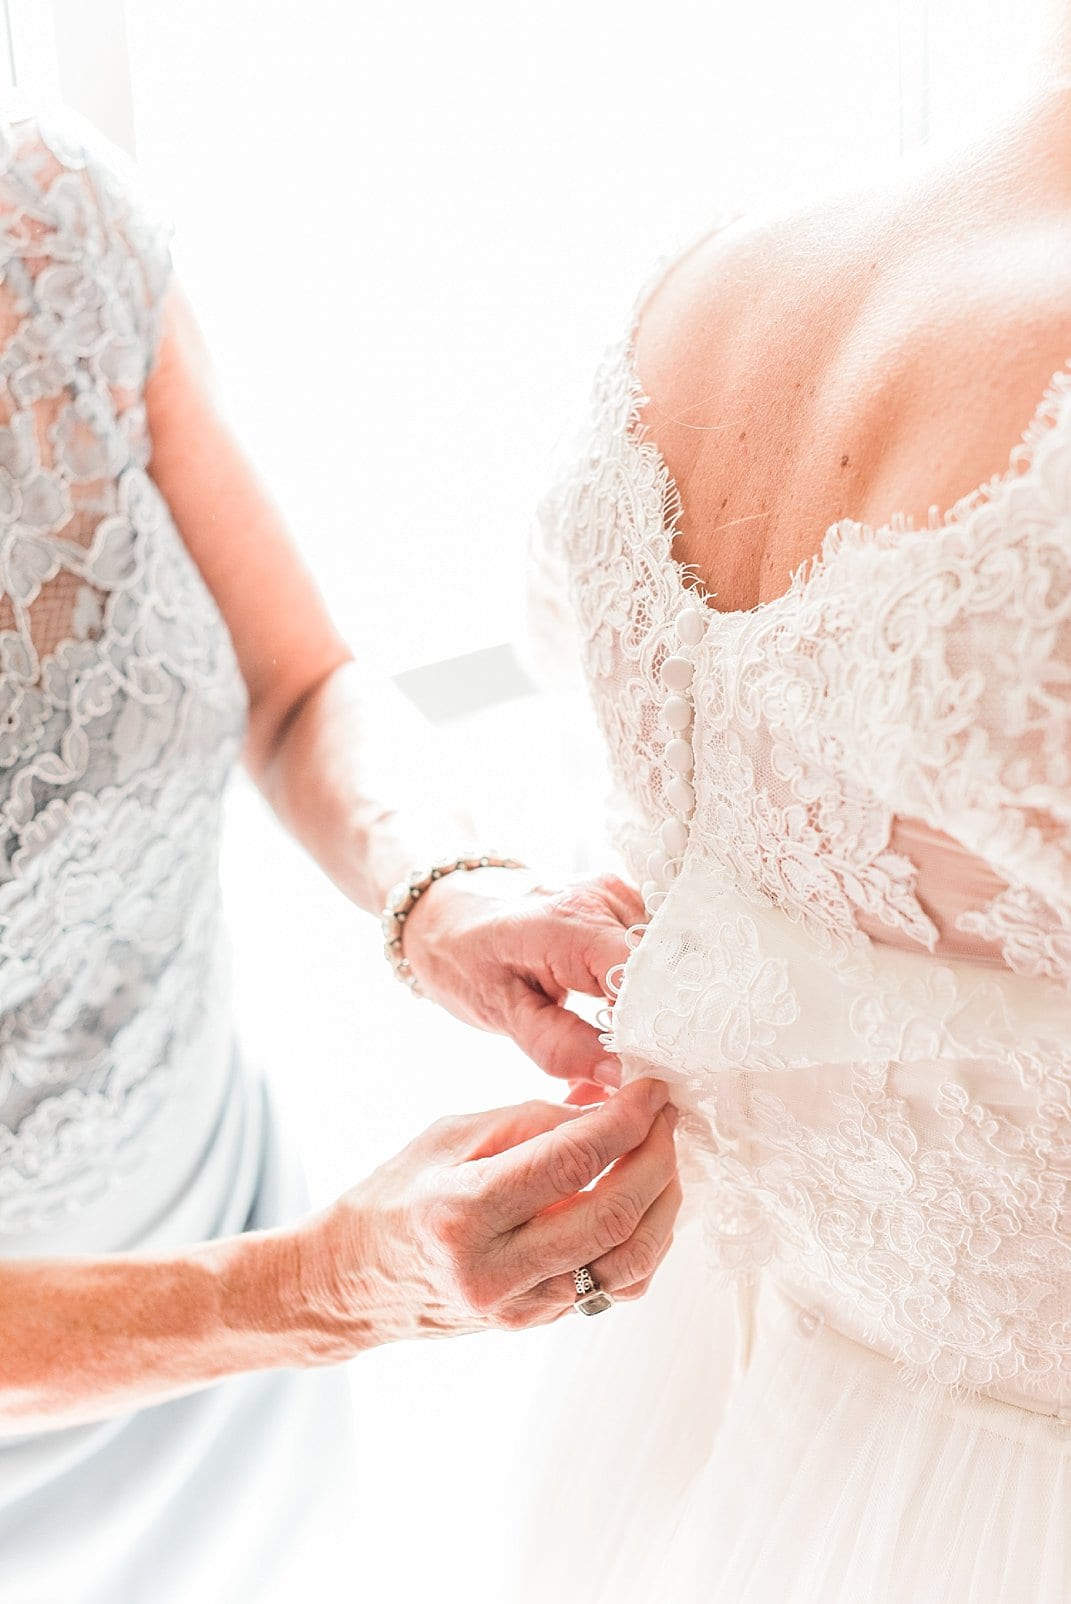 raleigh, nc mother of bride buttoning brides lace dress photo